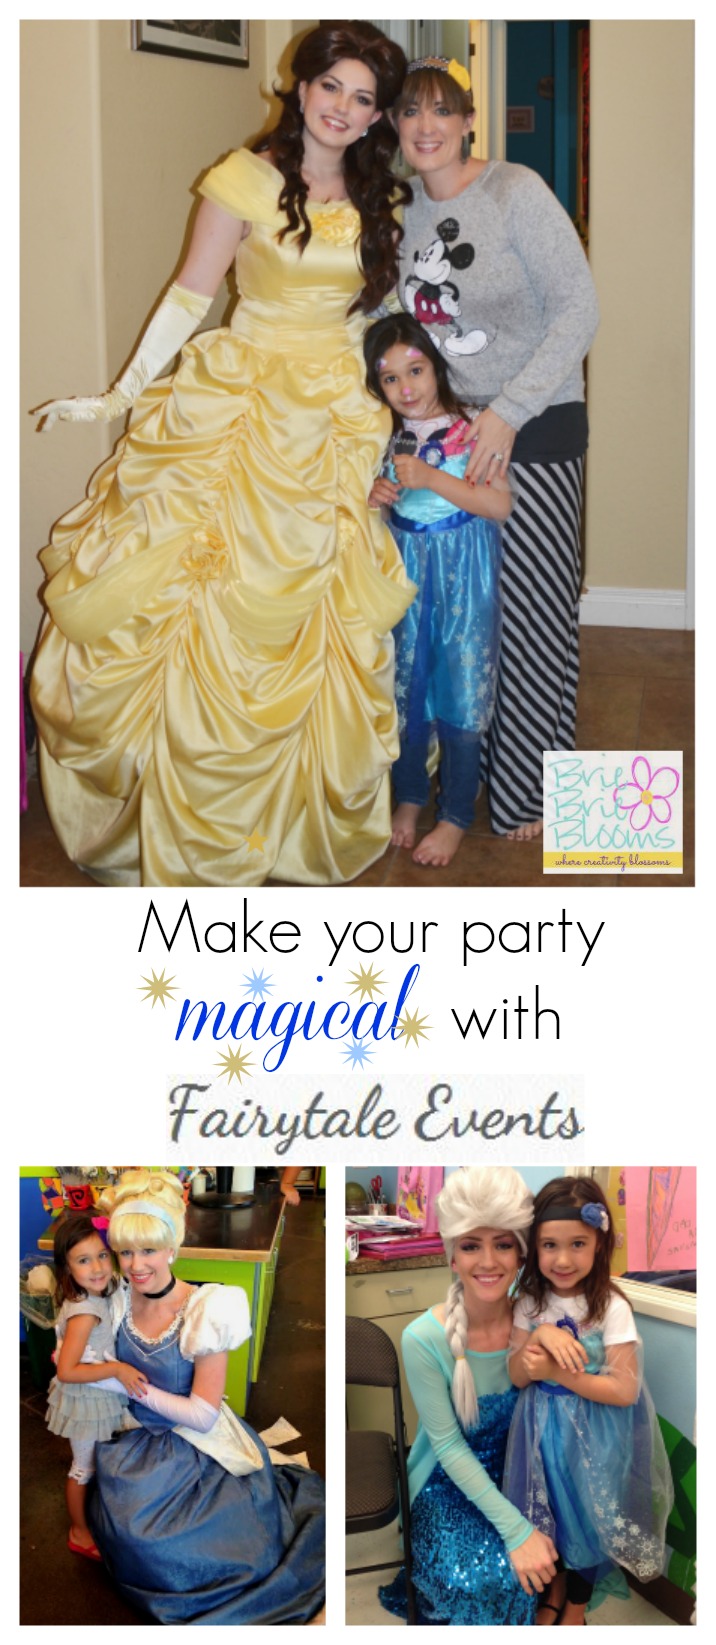 Make your party magical with Fairytale Events (Arizona)